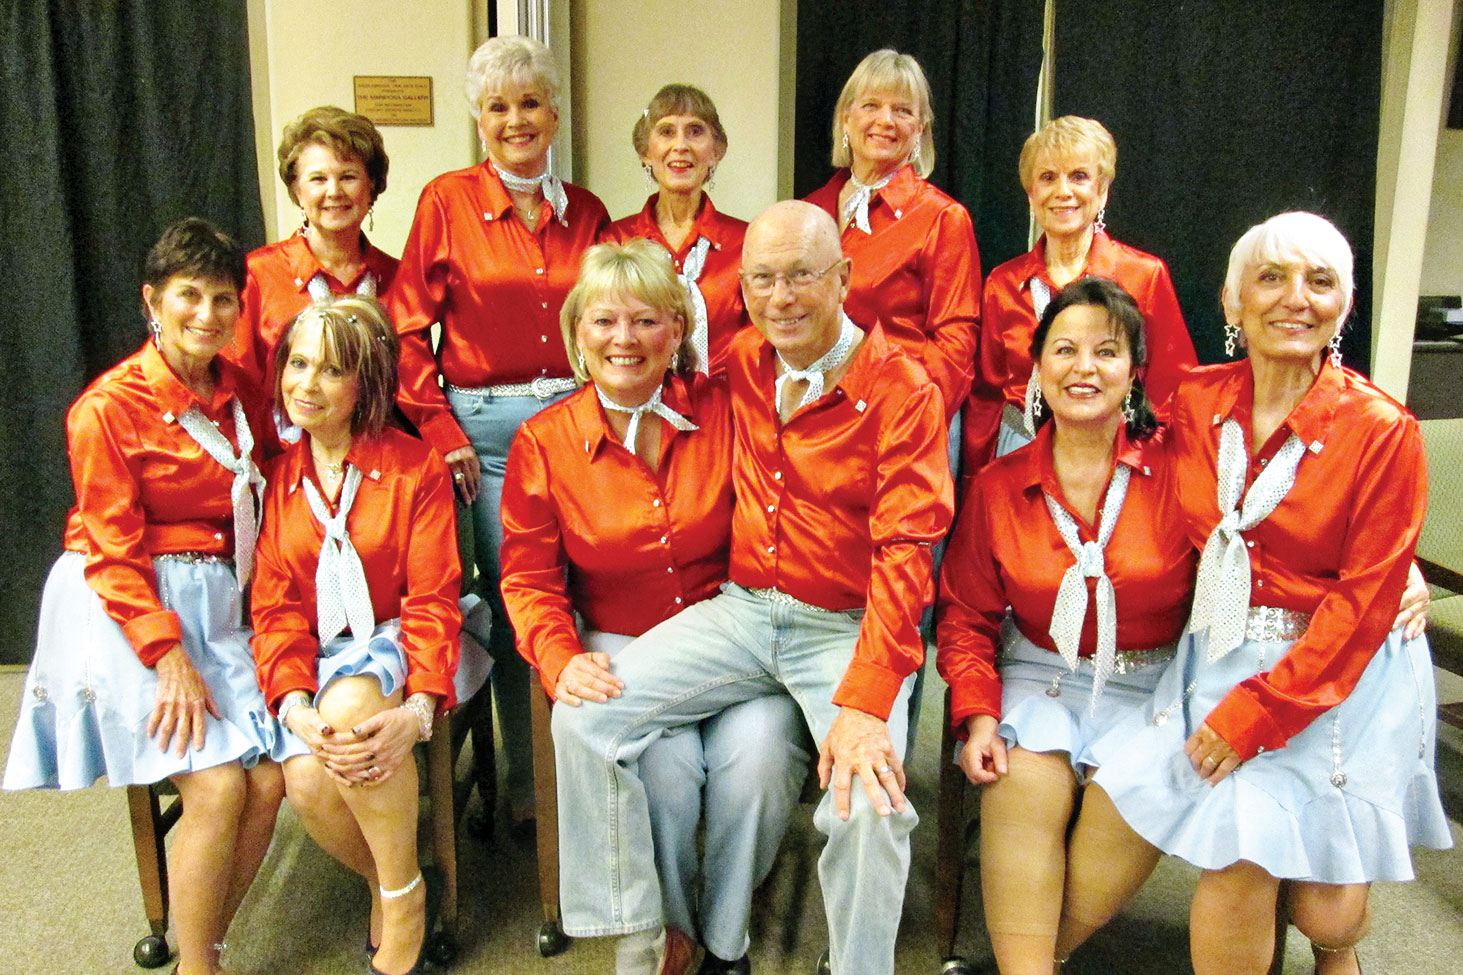 Waiting to perform are, back row, from left: Stephanie Cady, Carol Jones, Pat Tiefenbach, Donna Barnard and Pat Cox; front row: Ellen Victor, Florence Messer, Jo Helms, Dan Marsh, Sylvia Bonesky and Donna Leonard.